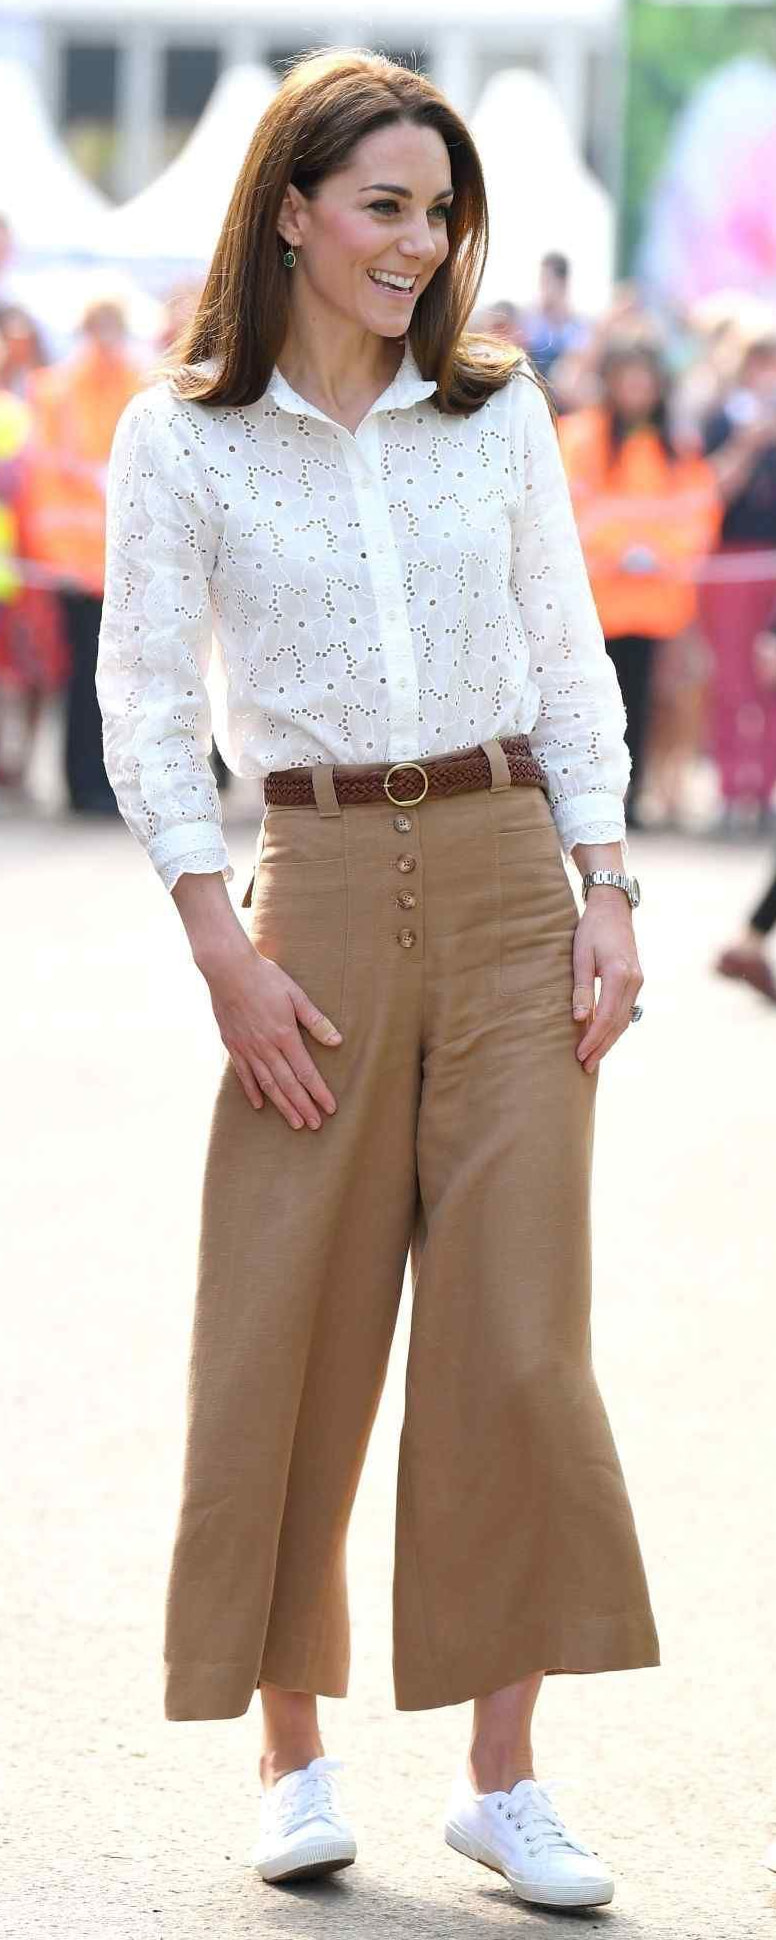 Massimo Dutti Buttoned Culottes as seen on Kate Middleton, The Duchess of Cambridge.